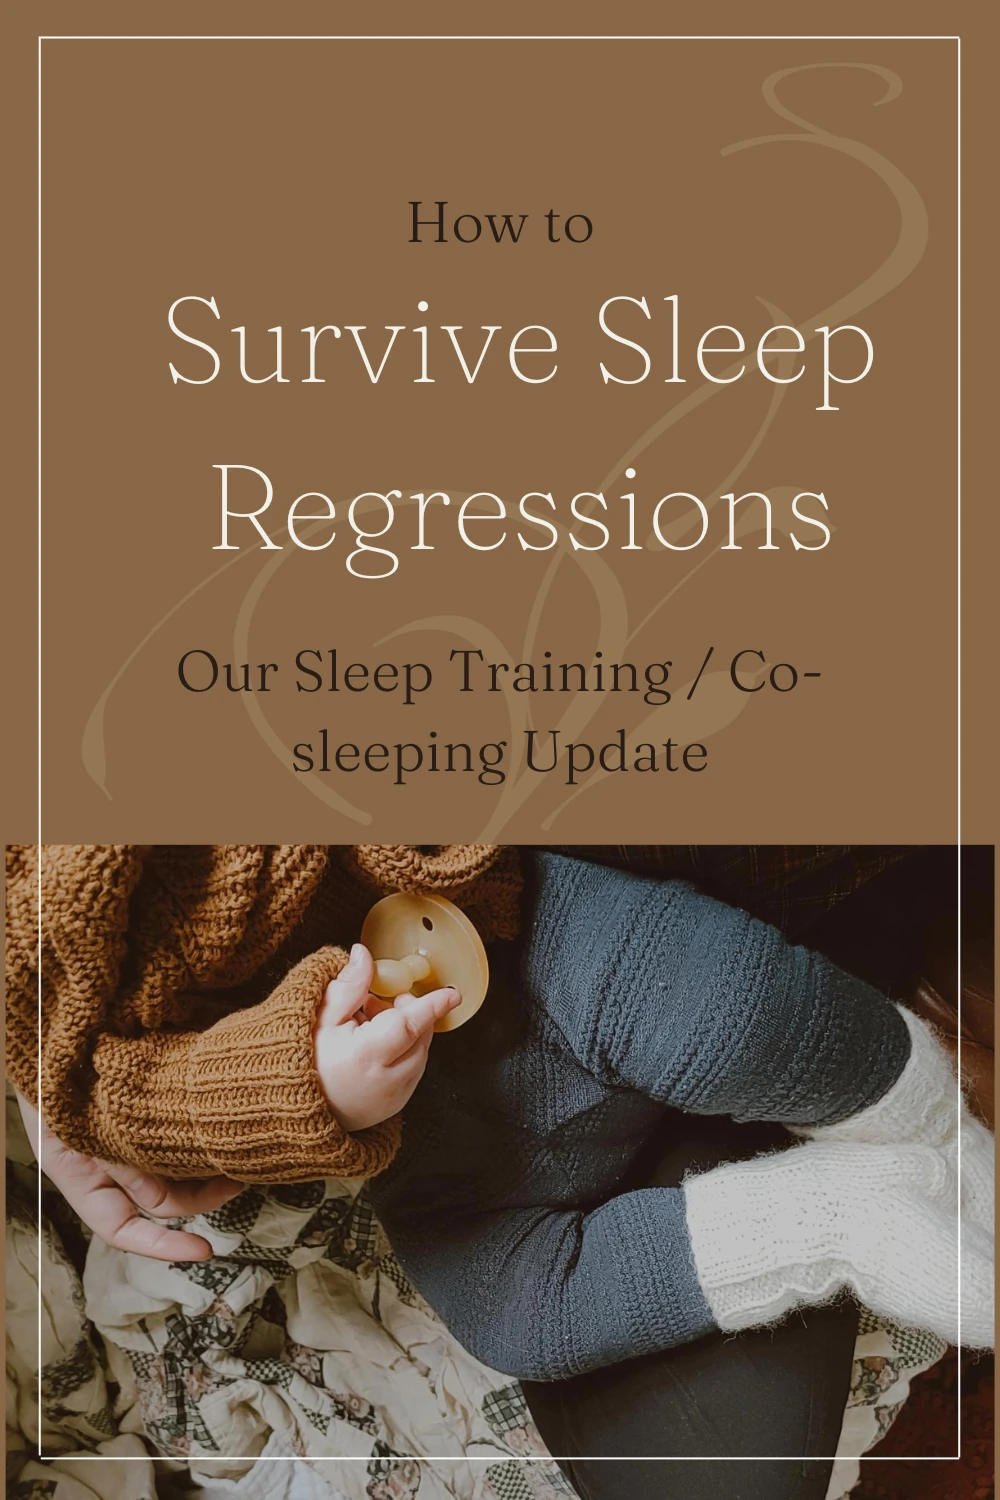 How to Survive Sleep Regressions